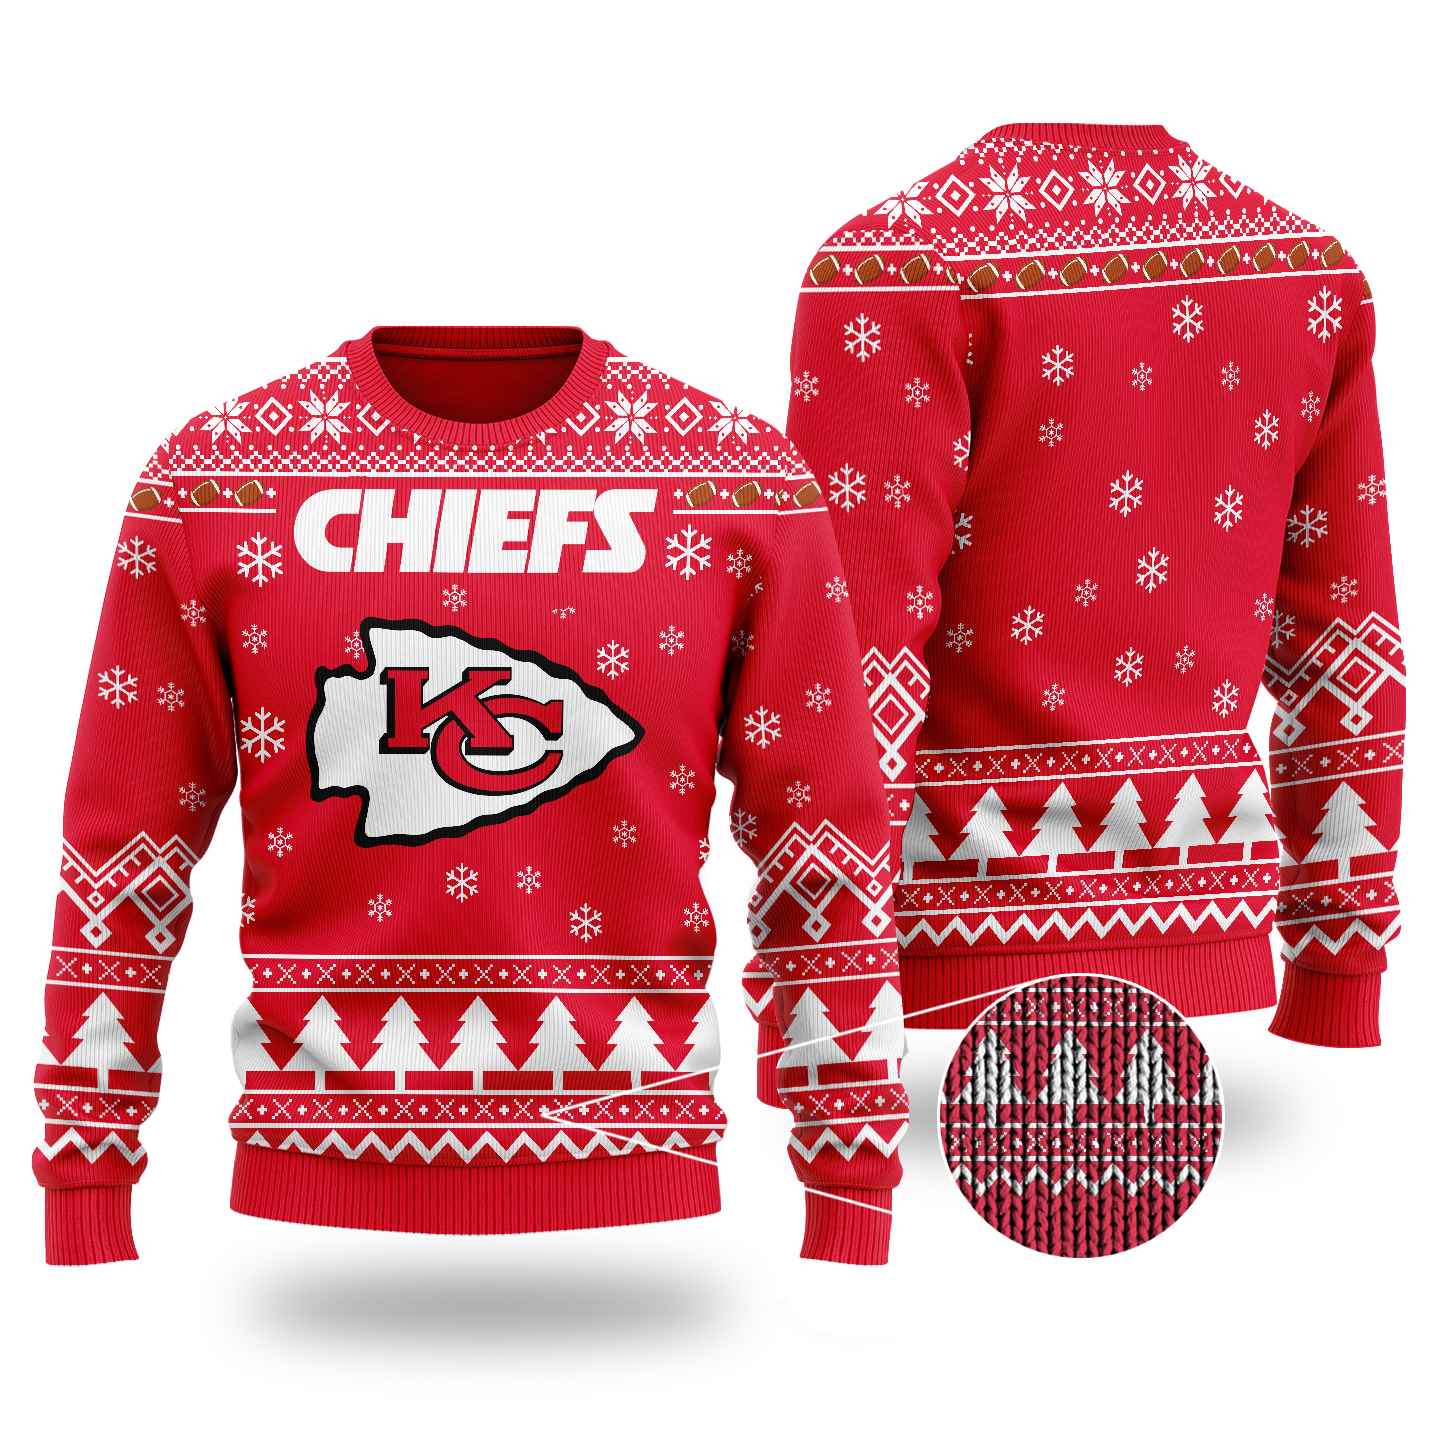 Nfl Kansas City Chiefs Chibi Ugly Christmas Sweater Wool Material